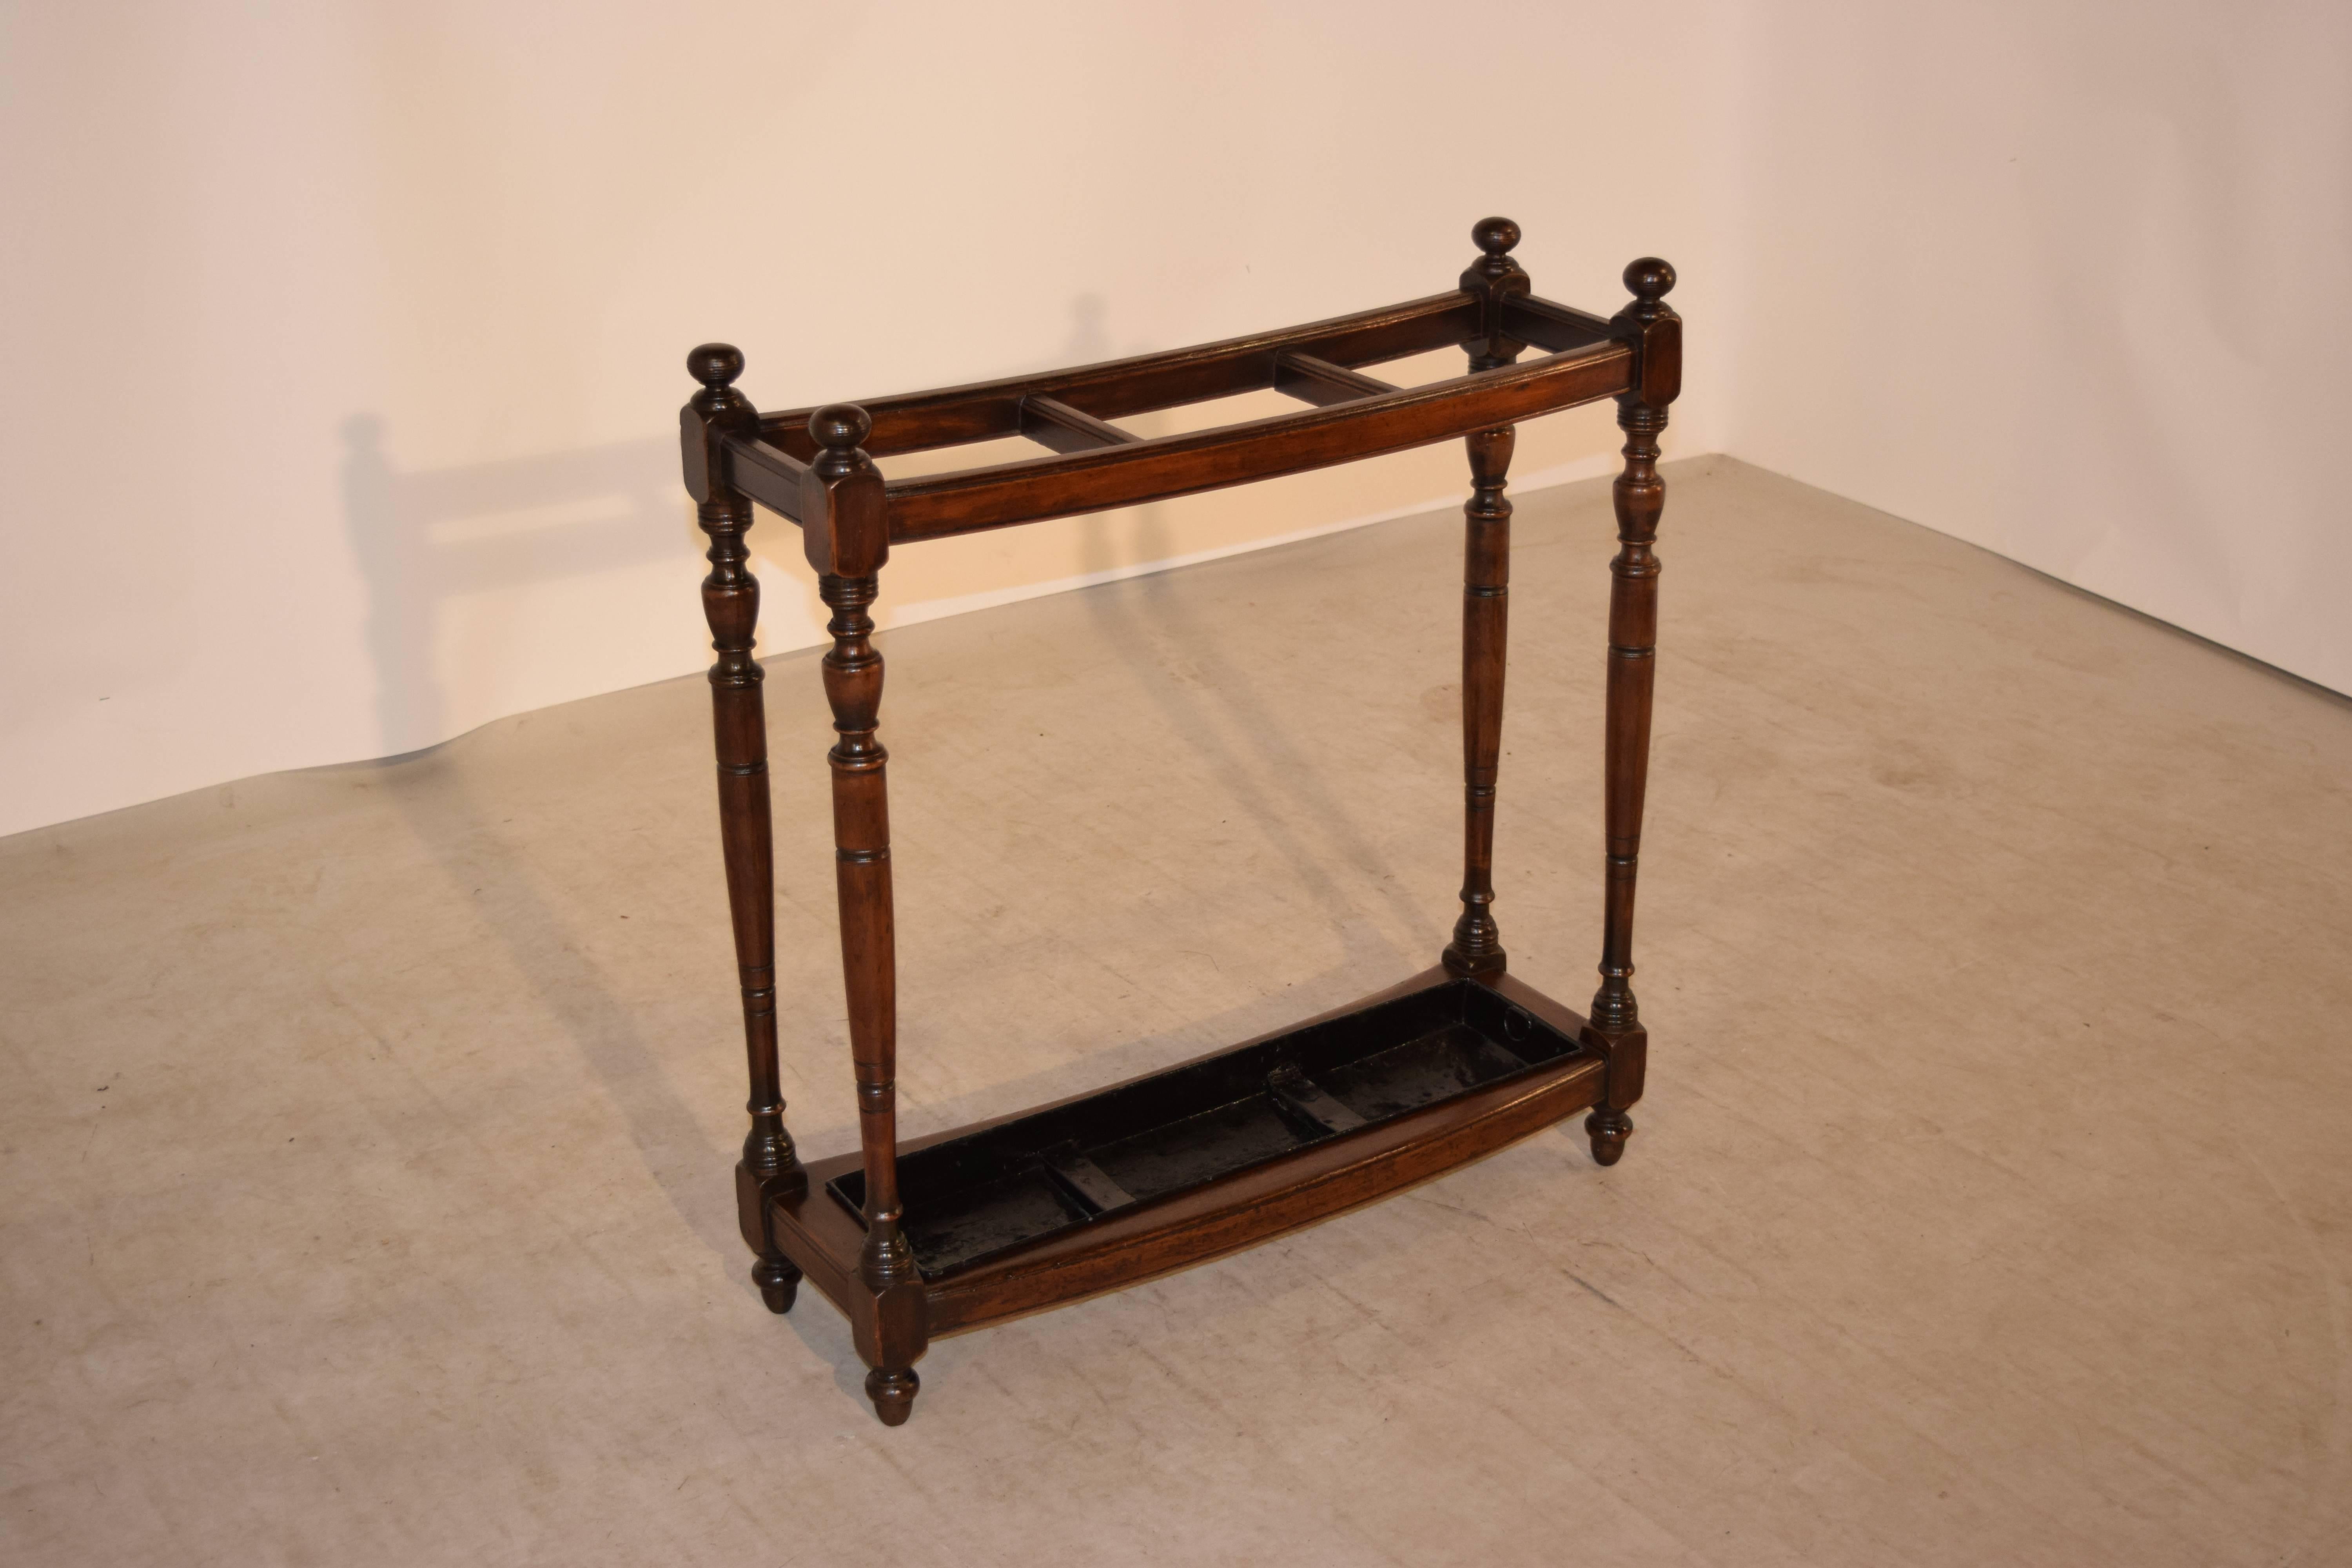 19th Century English curved umbrella stand made from mahogany.  The legs are hand turned mahogany and are connected at the bottom by a frame which hold a metal tray.